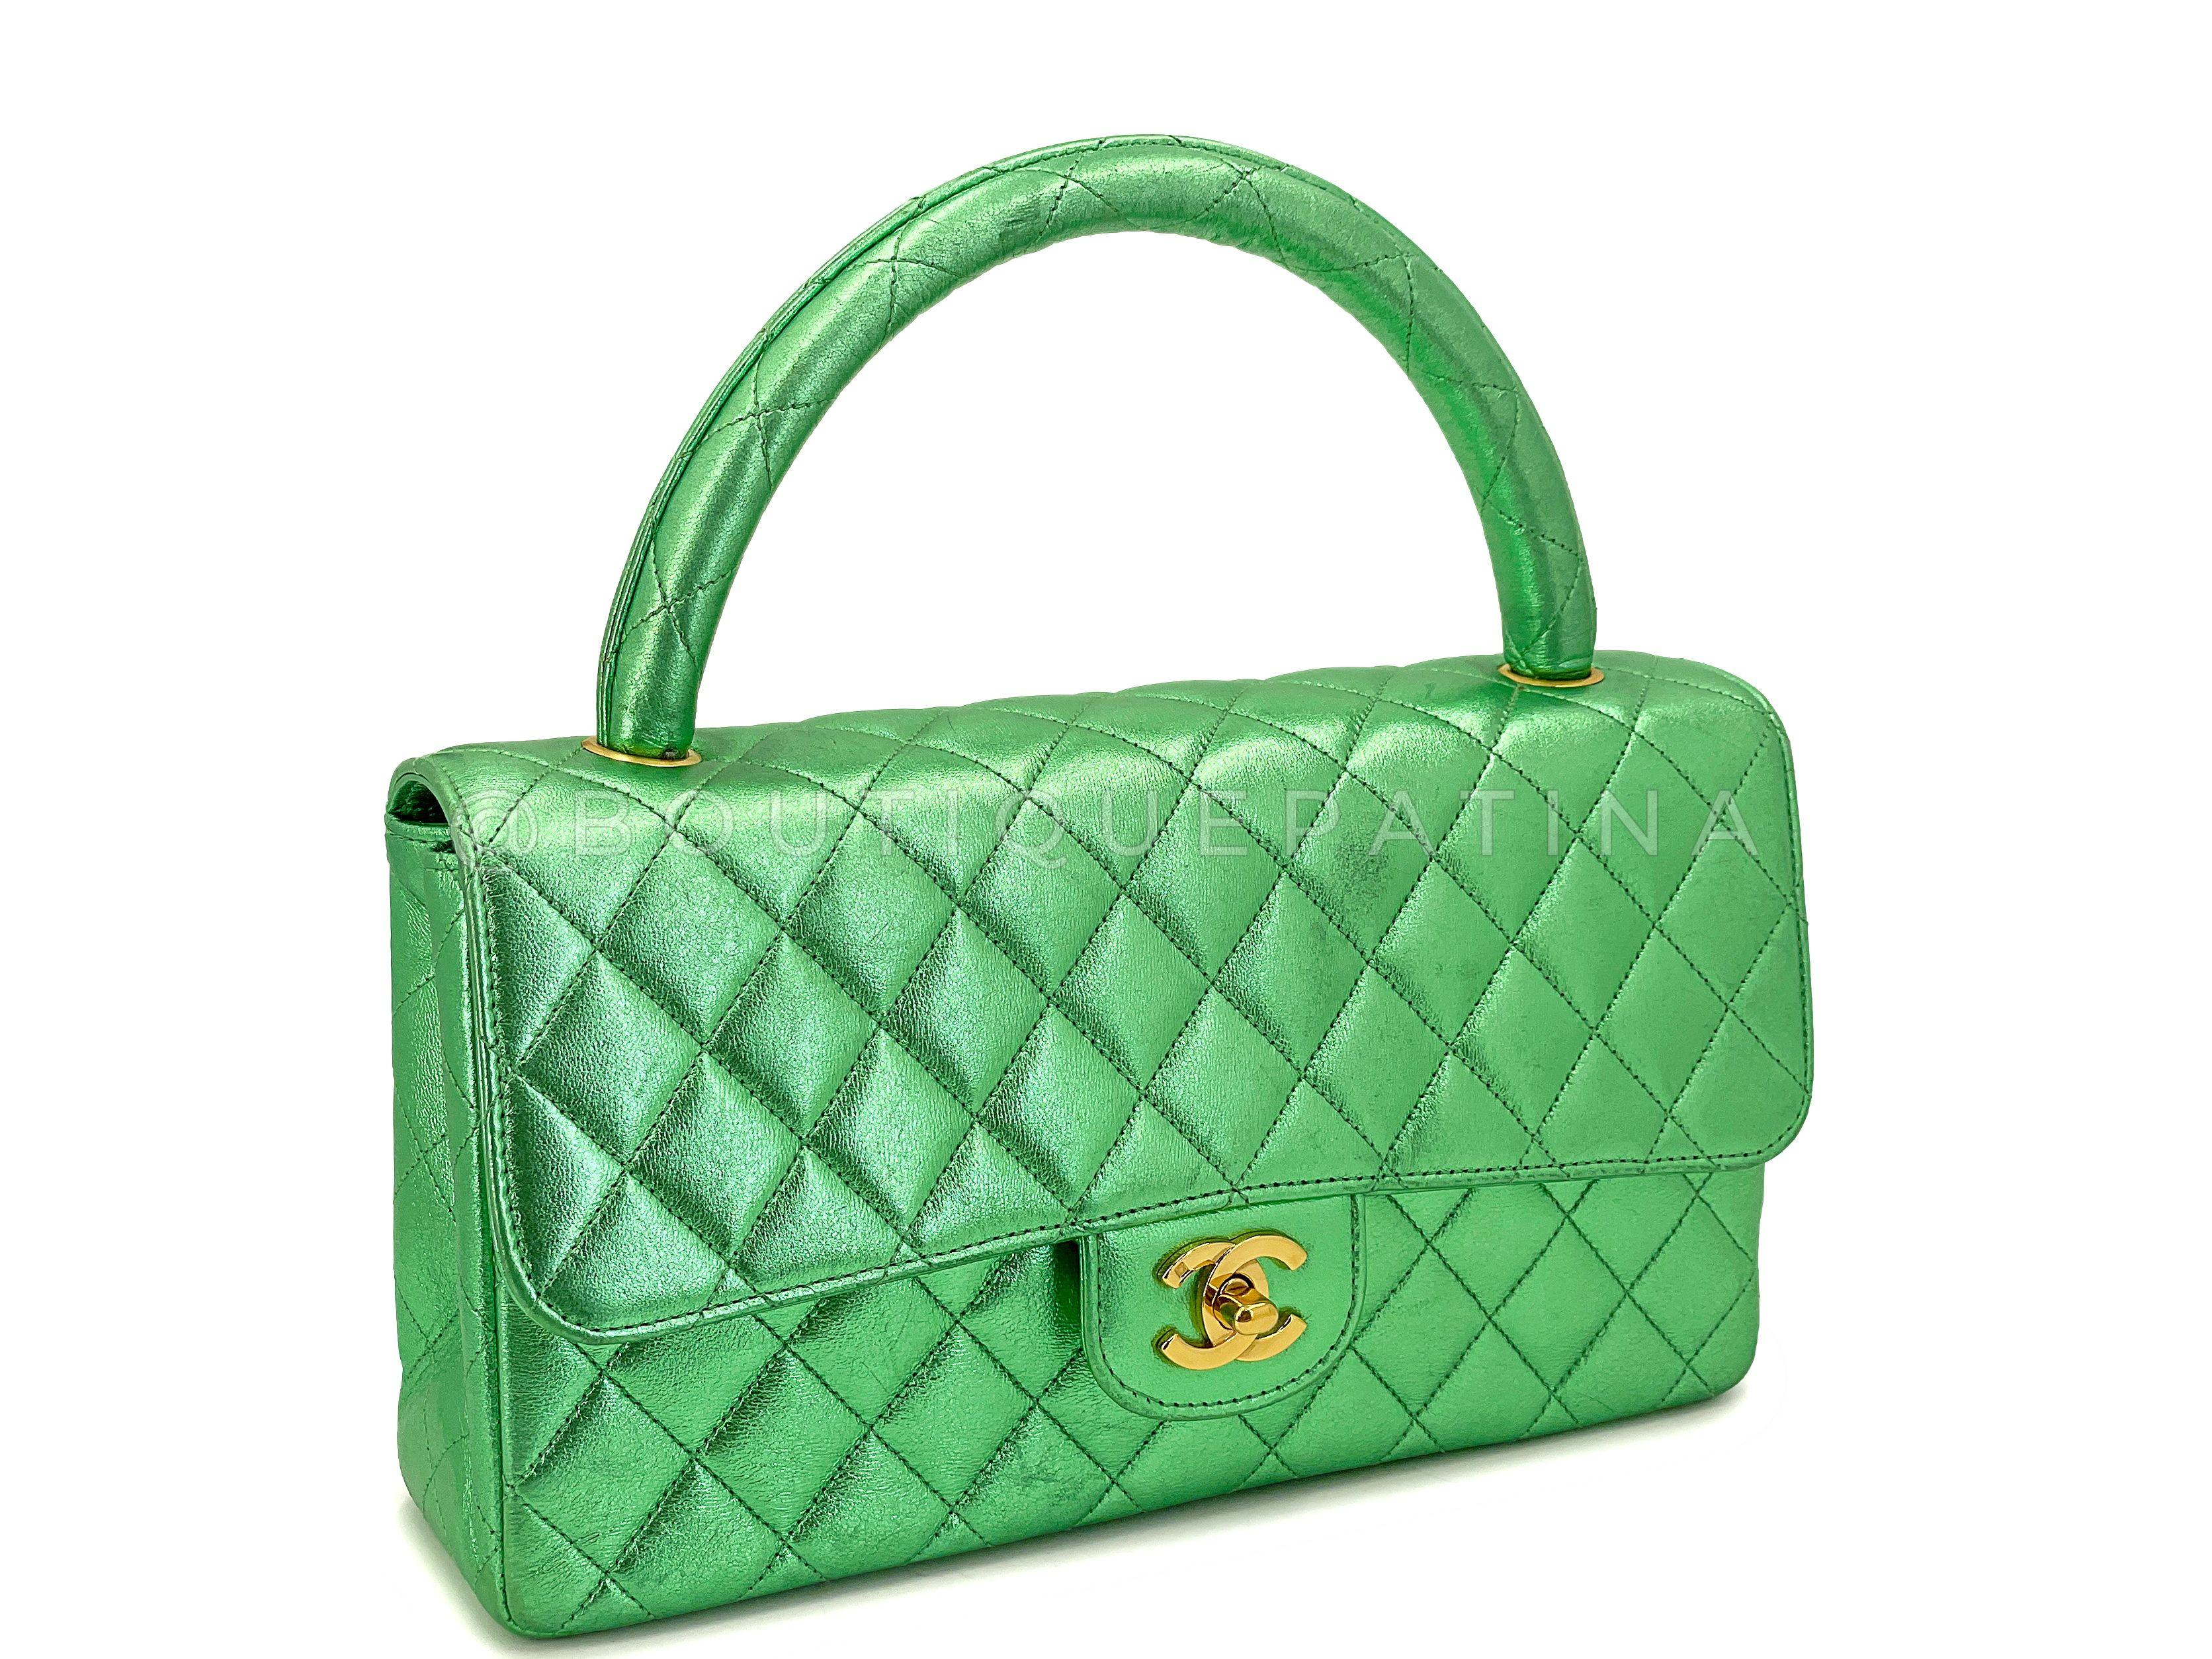 Chanel 1994 Vintage Parent Child Bag Kelly Flap Set Metallic Green 24k GHW 67742 In Excellent Condition For Sale In Costa Mesa, CA